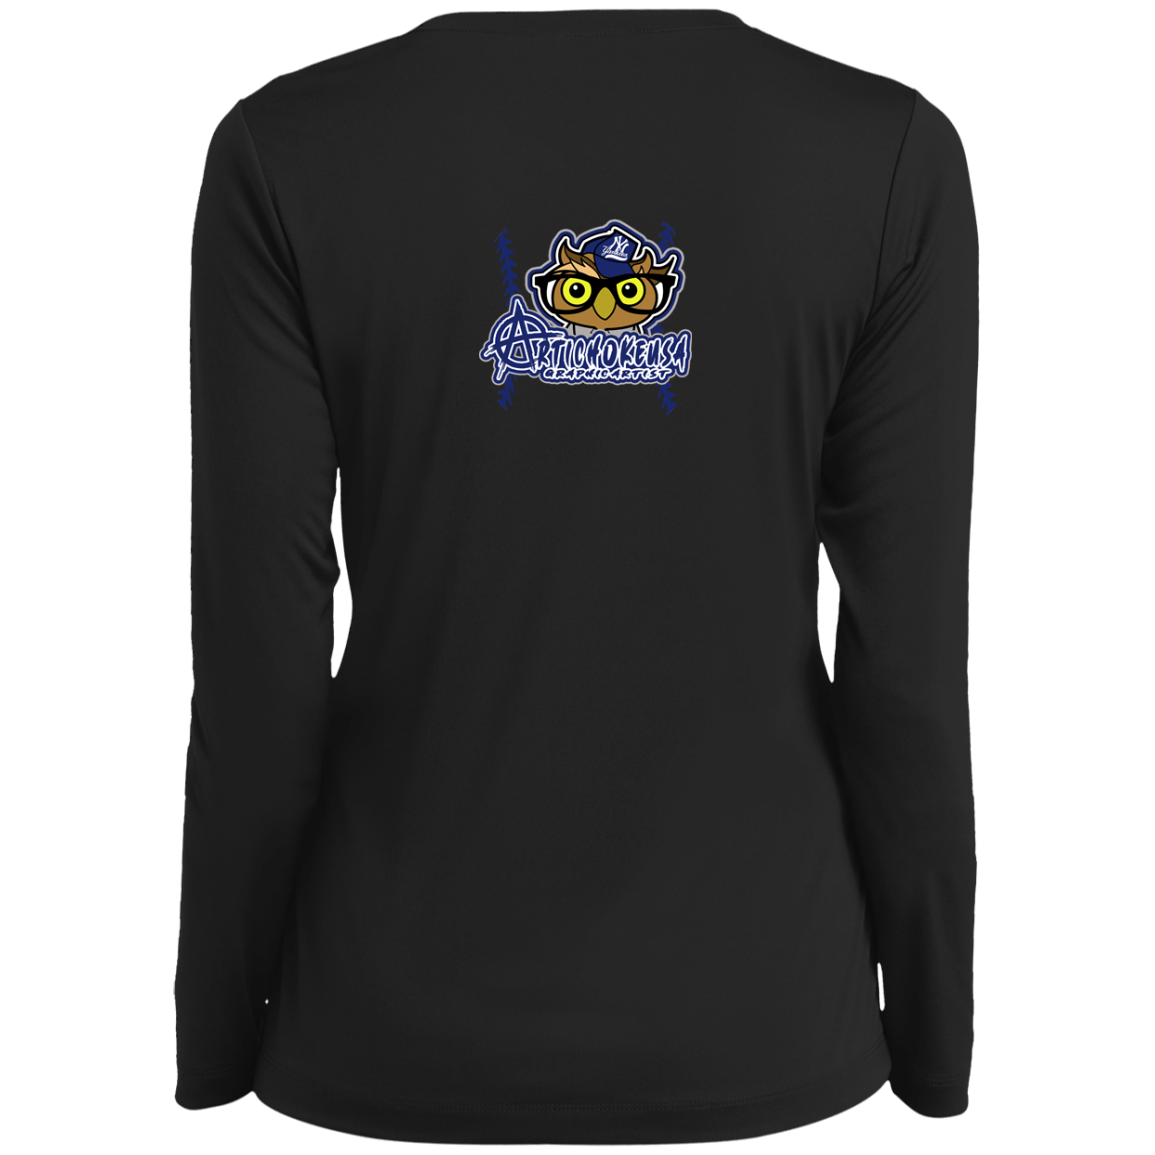 ArtichokeUSA Character and Font design. New York Owl. NY Yankees Fan Art. Let's Create Your Own Team Design Today. Ladies’ Long Sleeve Performance V-Neck Tee